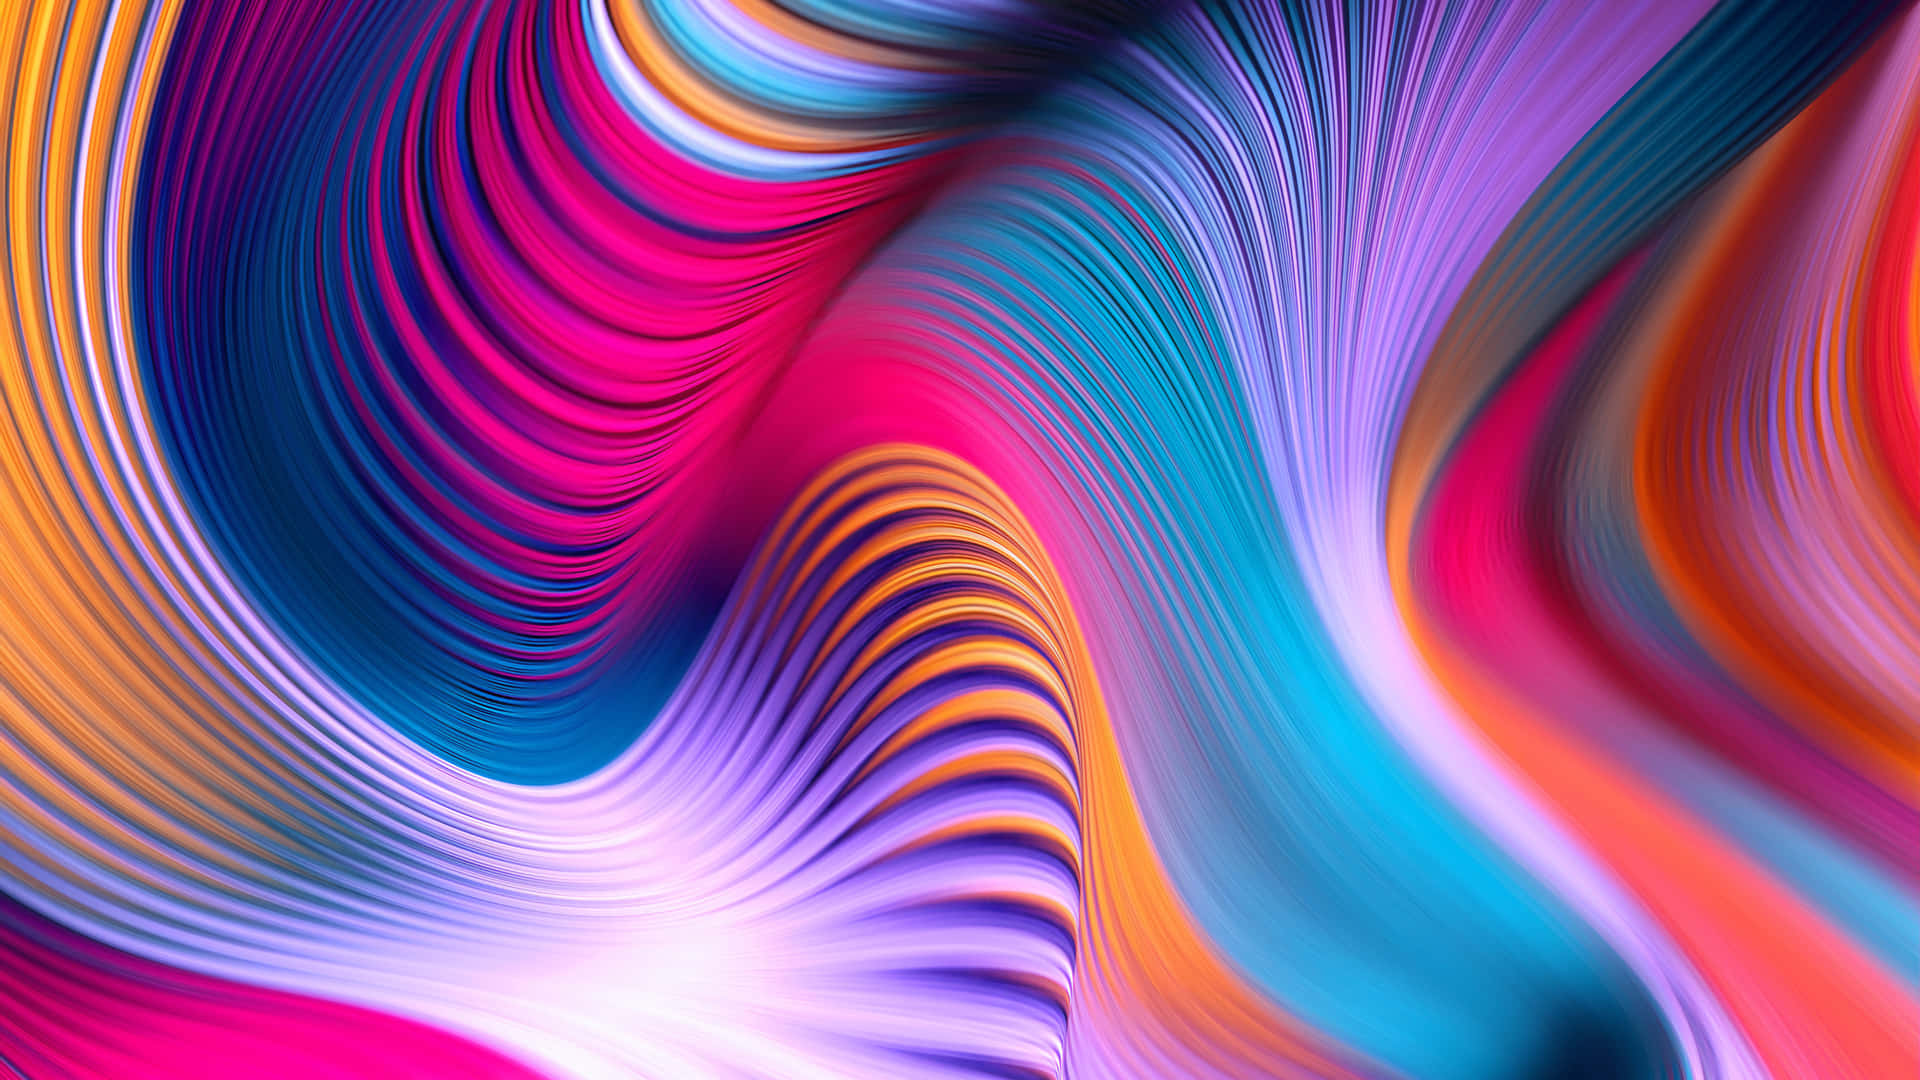 Vibrant Colorful Abstract Art Background